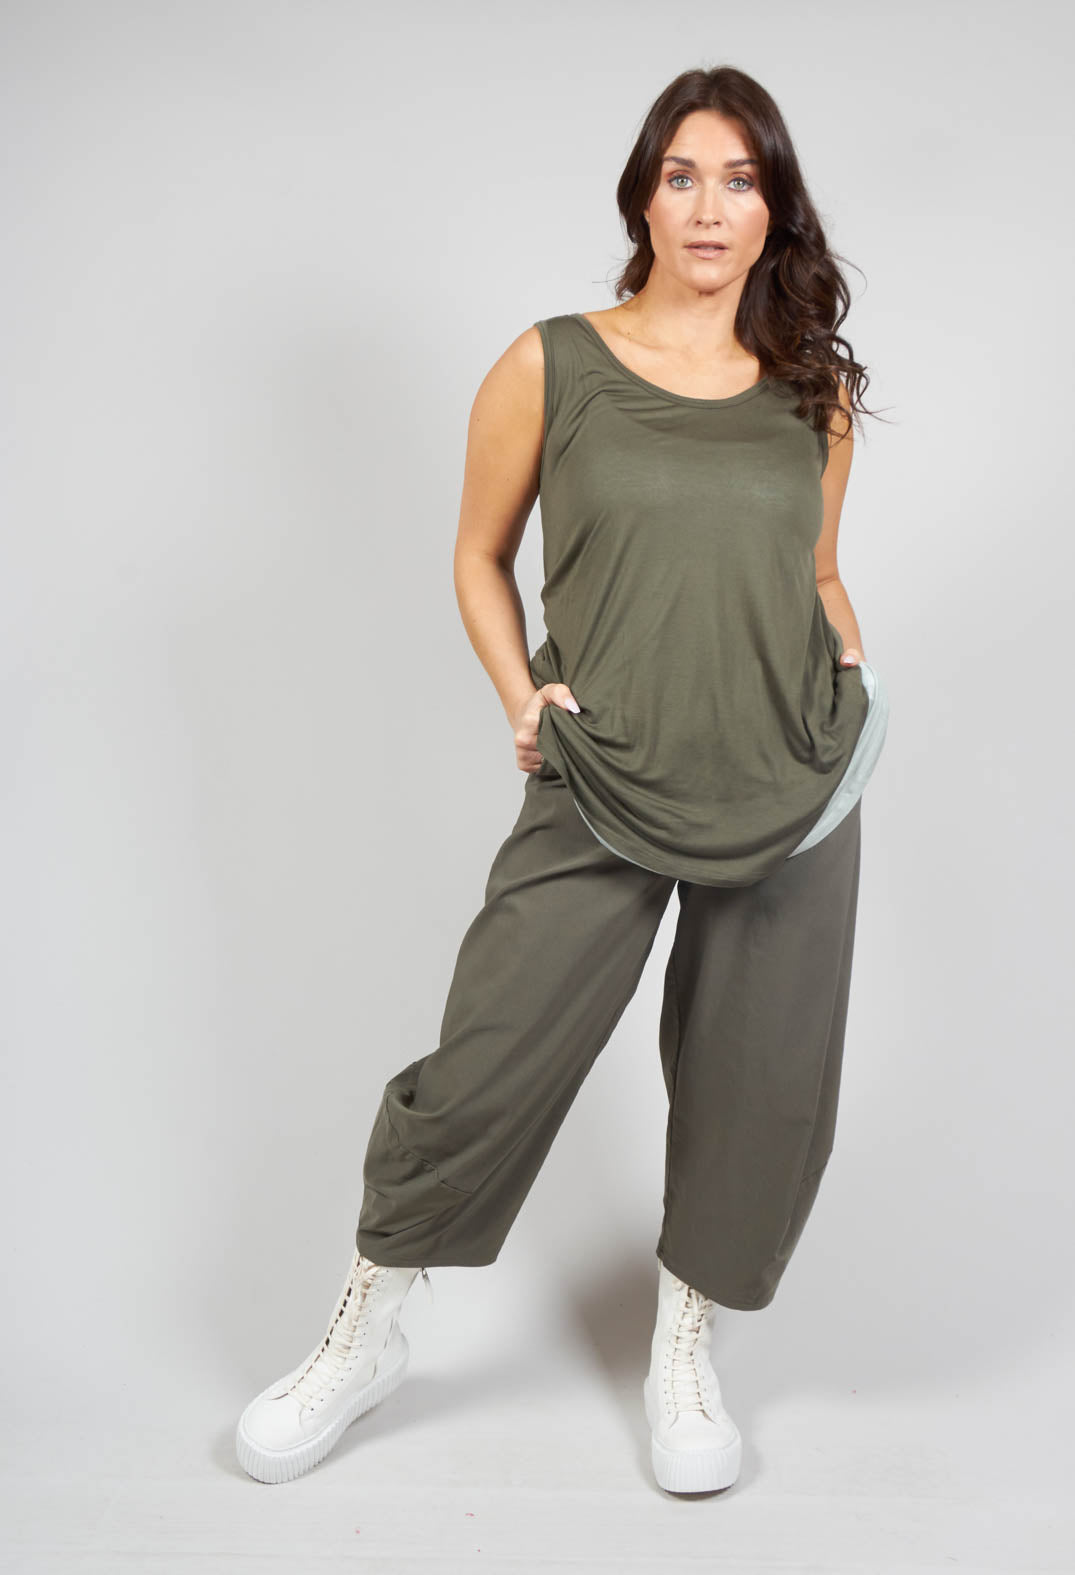 Double Fabric Vest Top in Olive Sky